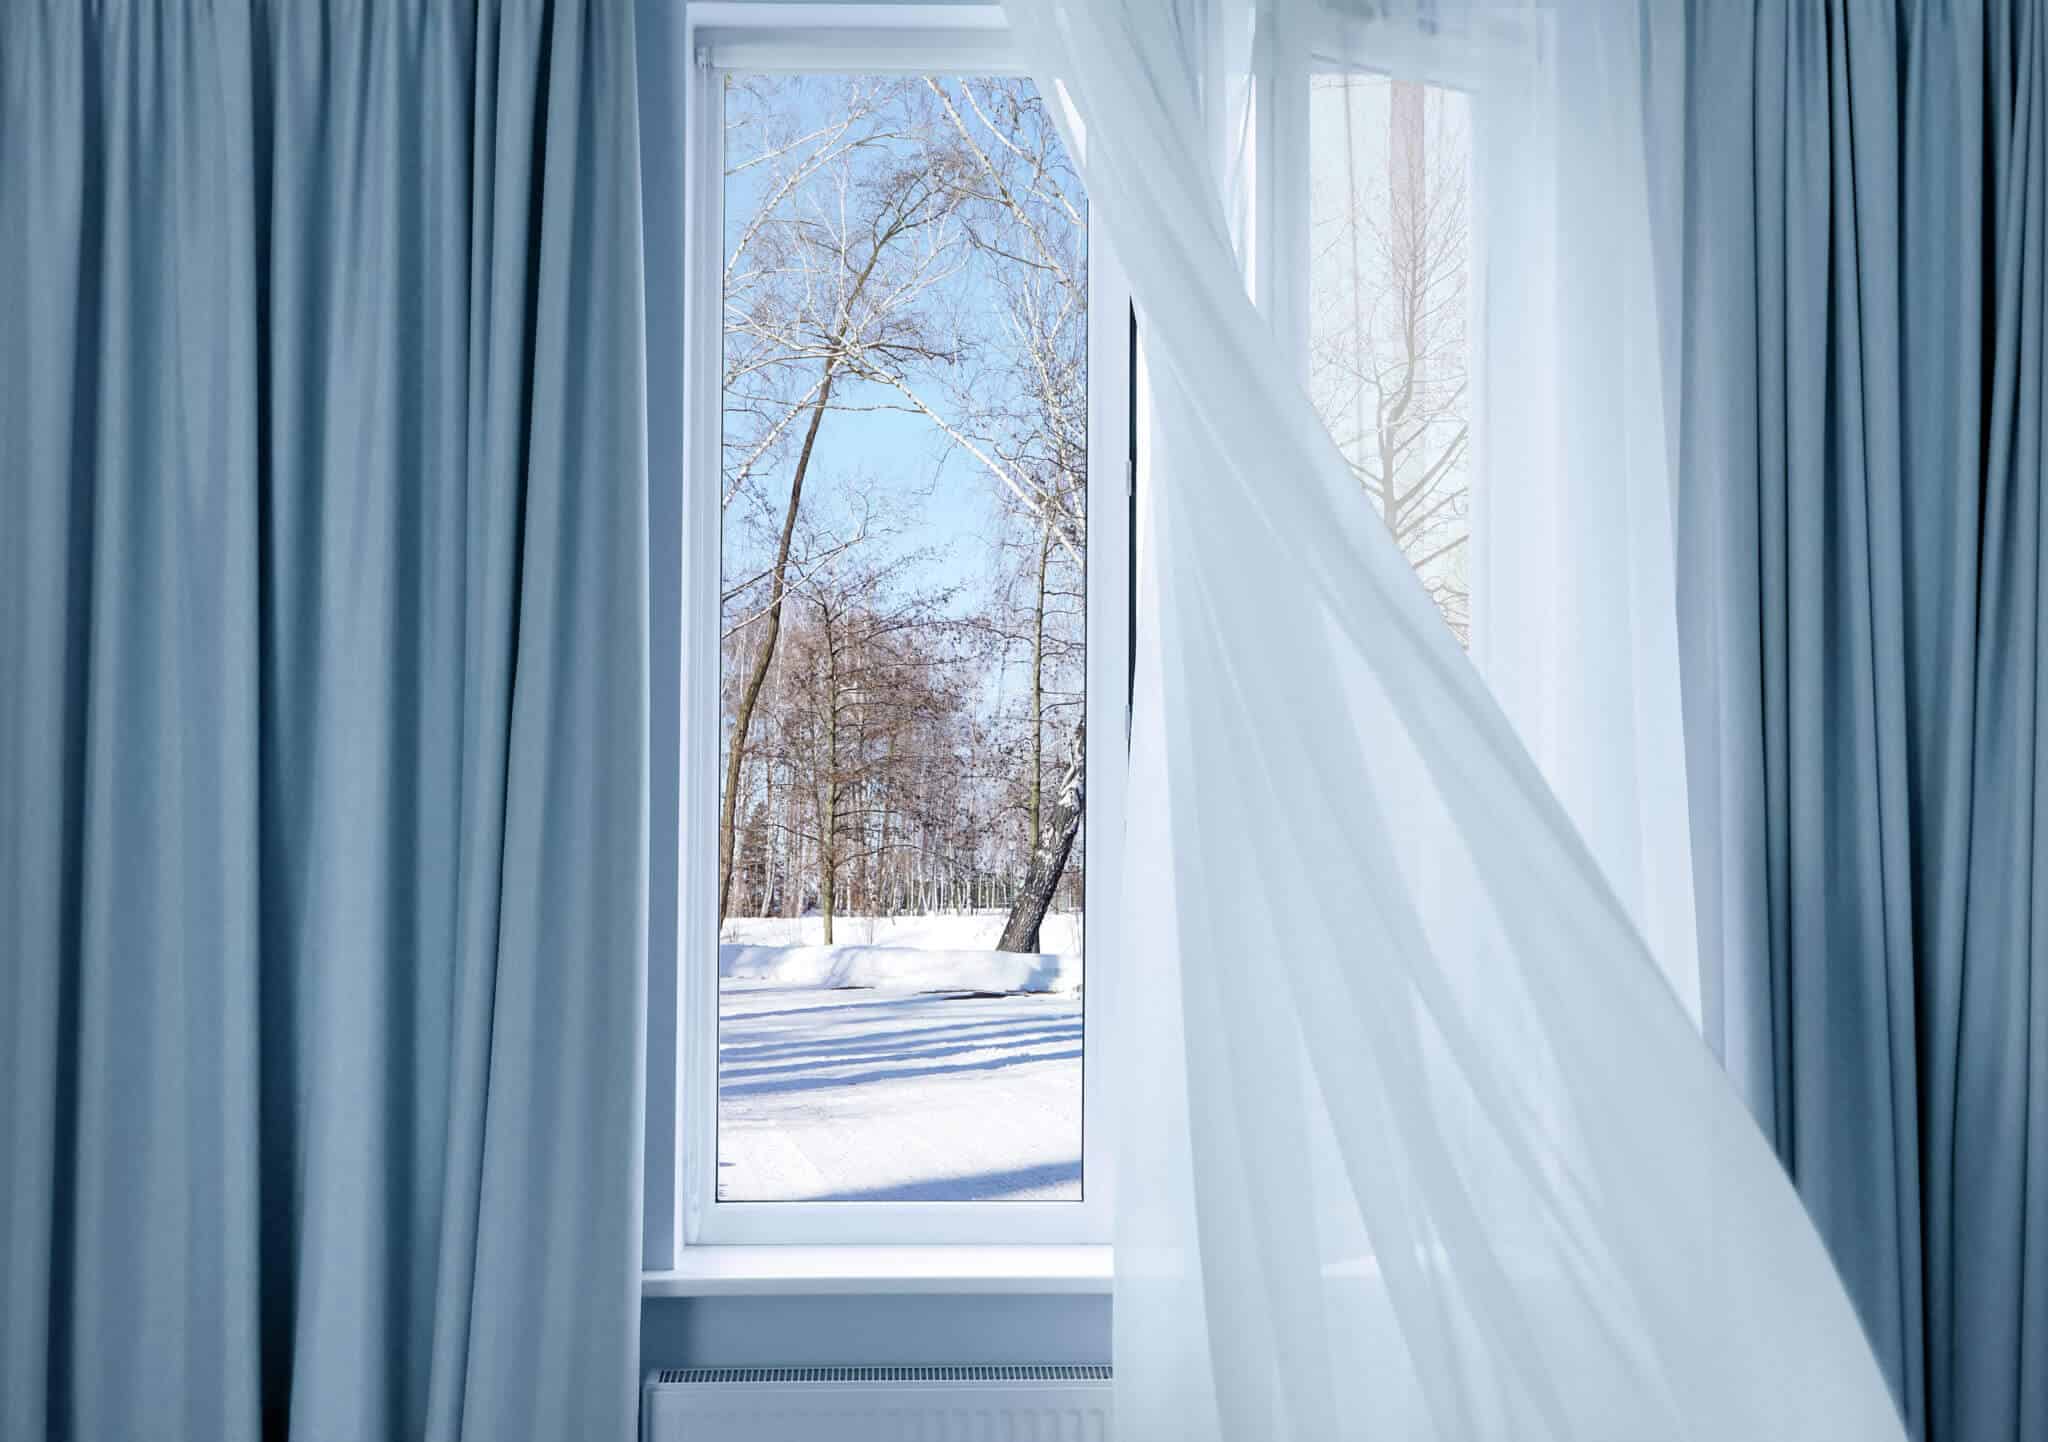 Do blinds help insulate in winter?